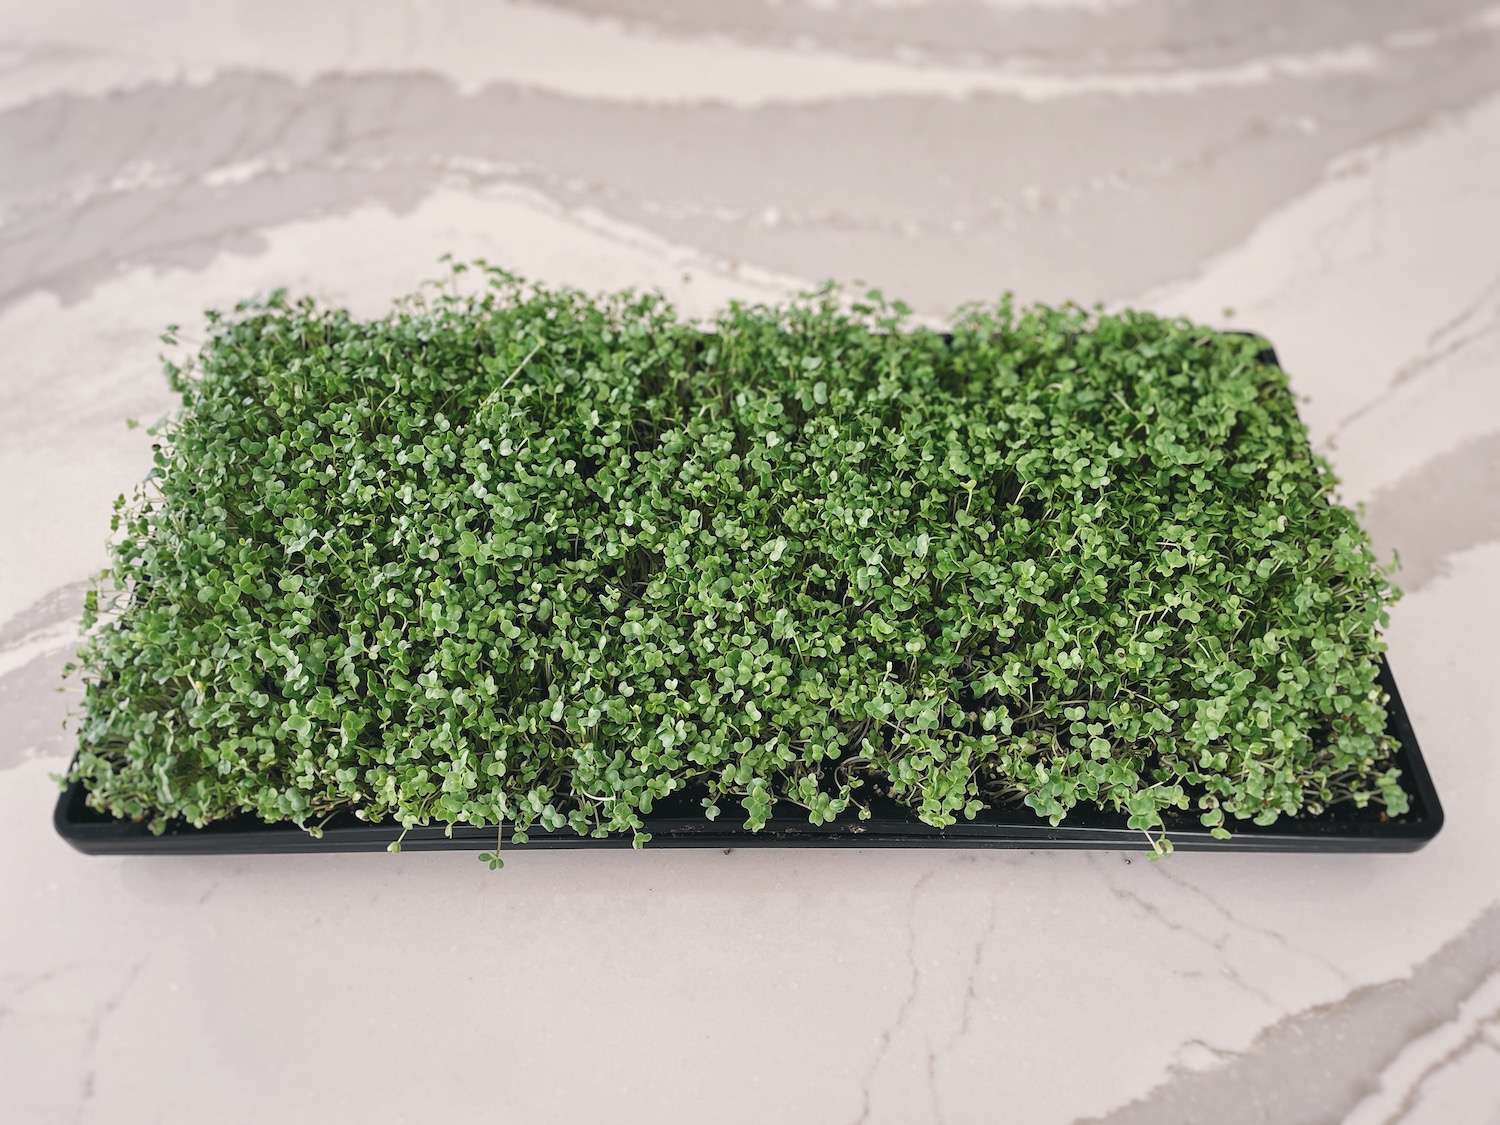 A 1020 growing tray filled with finished broccoli microgreens